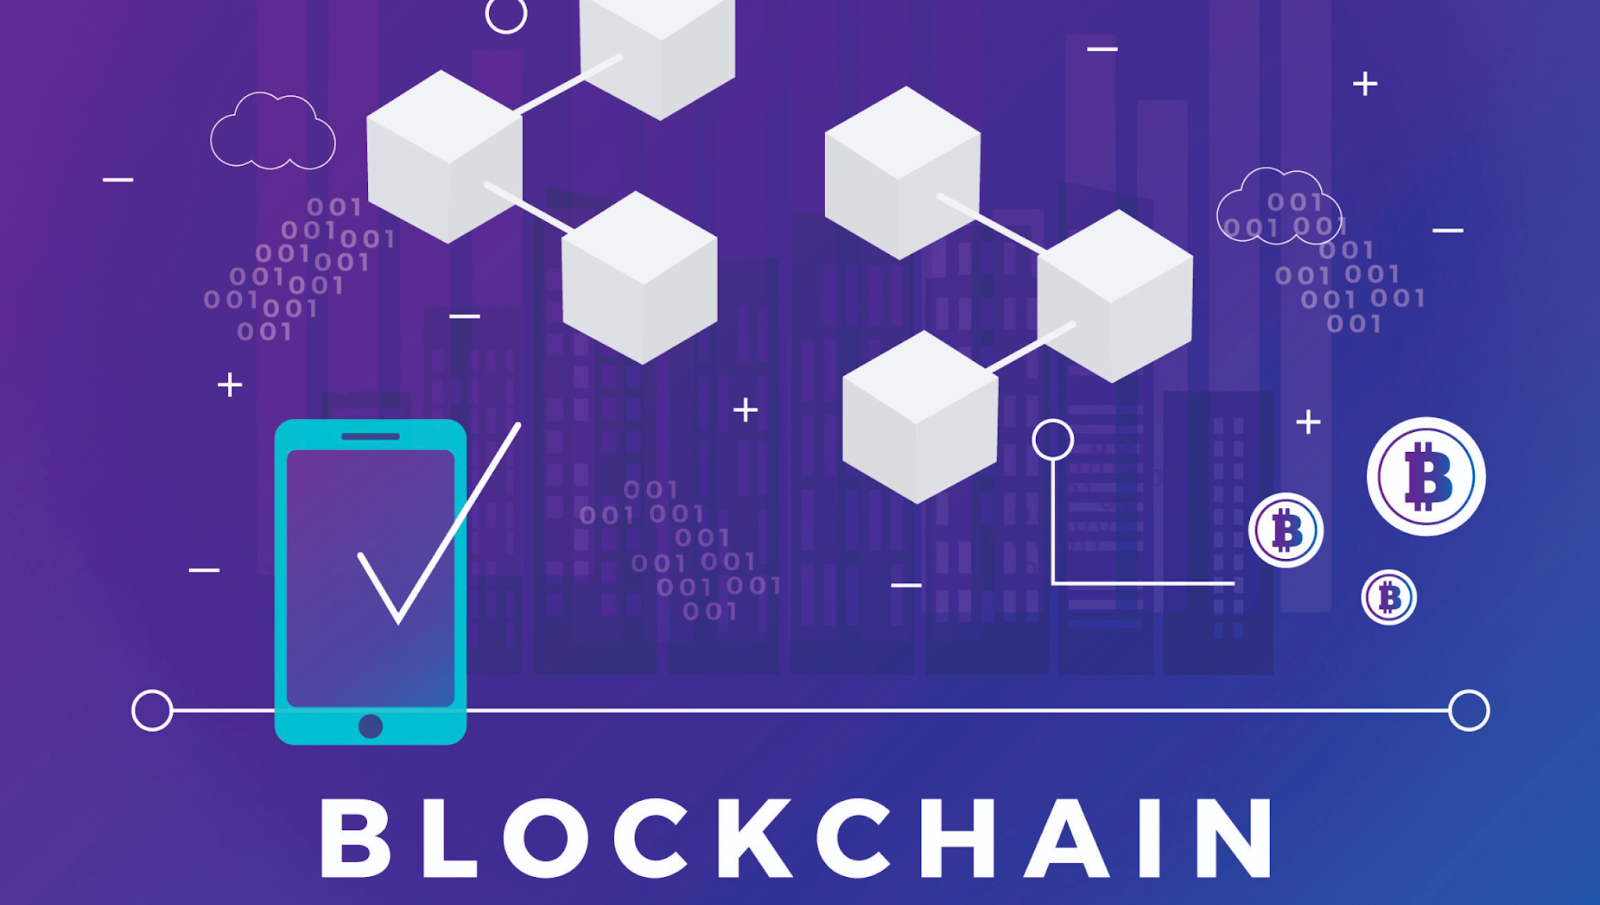 Conditions for integrating blockchain technology in enterprises